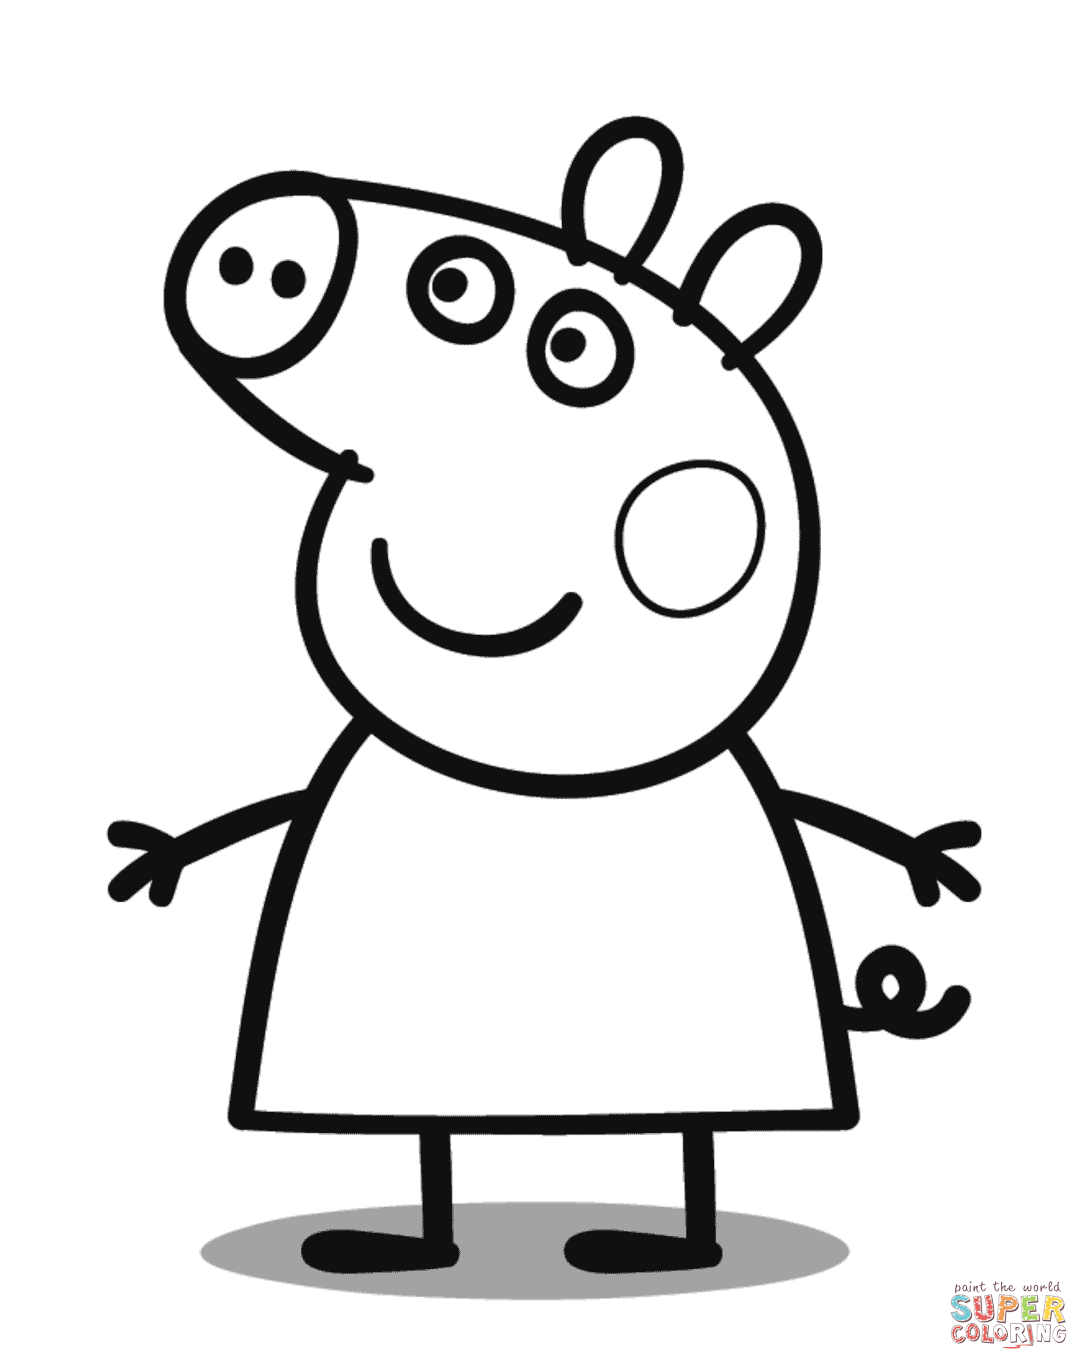 The Peppa Pig Coloring Page - Free Printable Coloring Pages for Kids